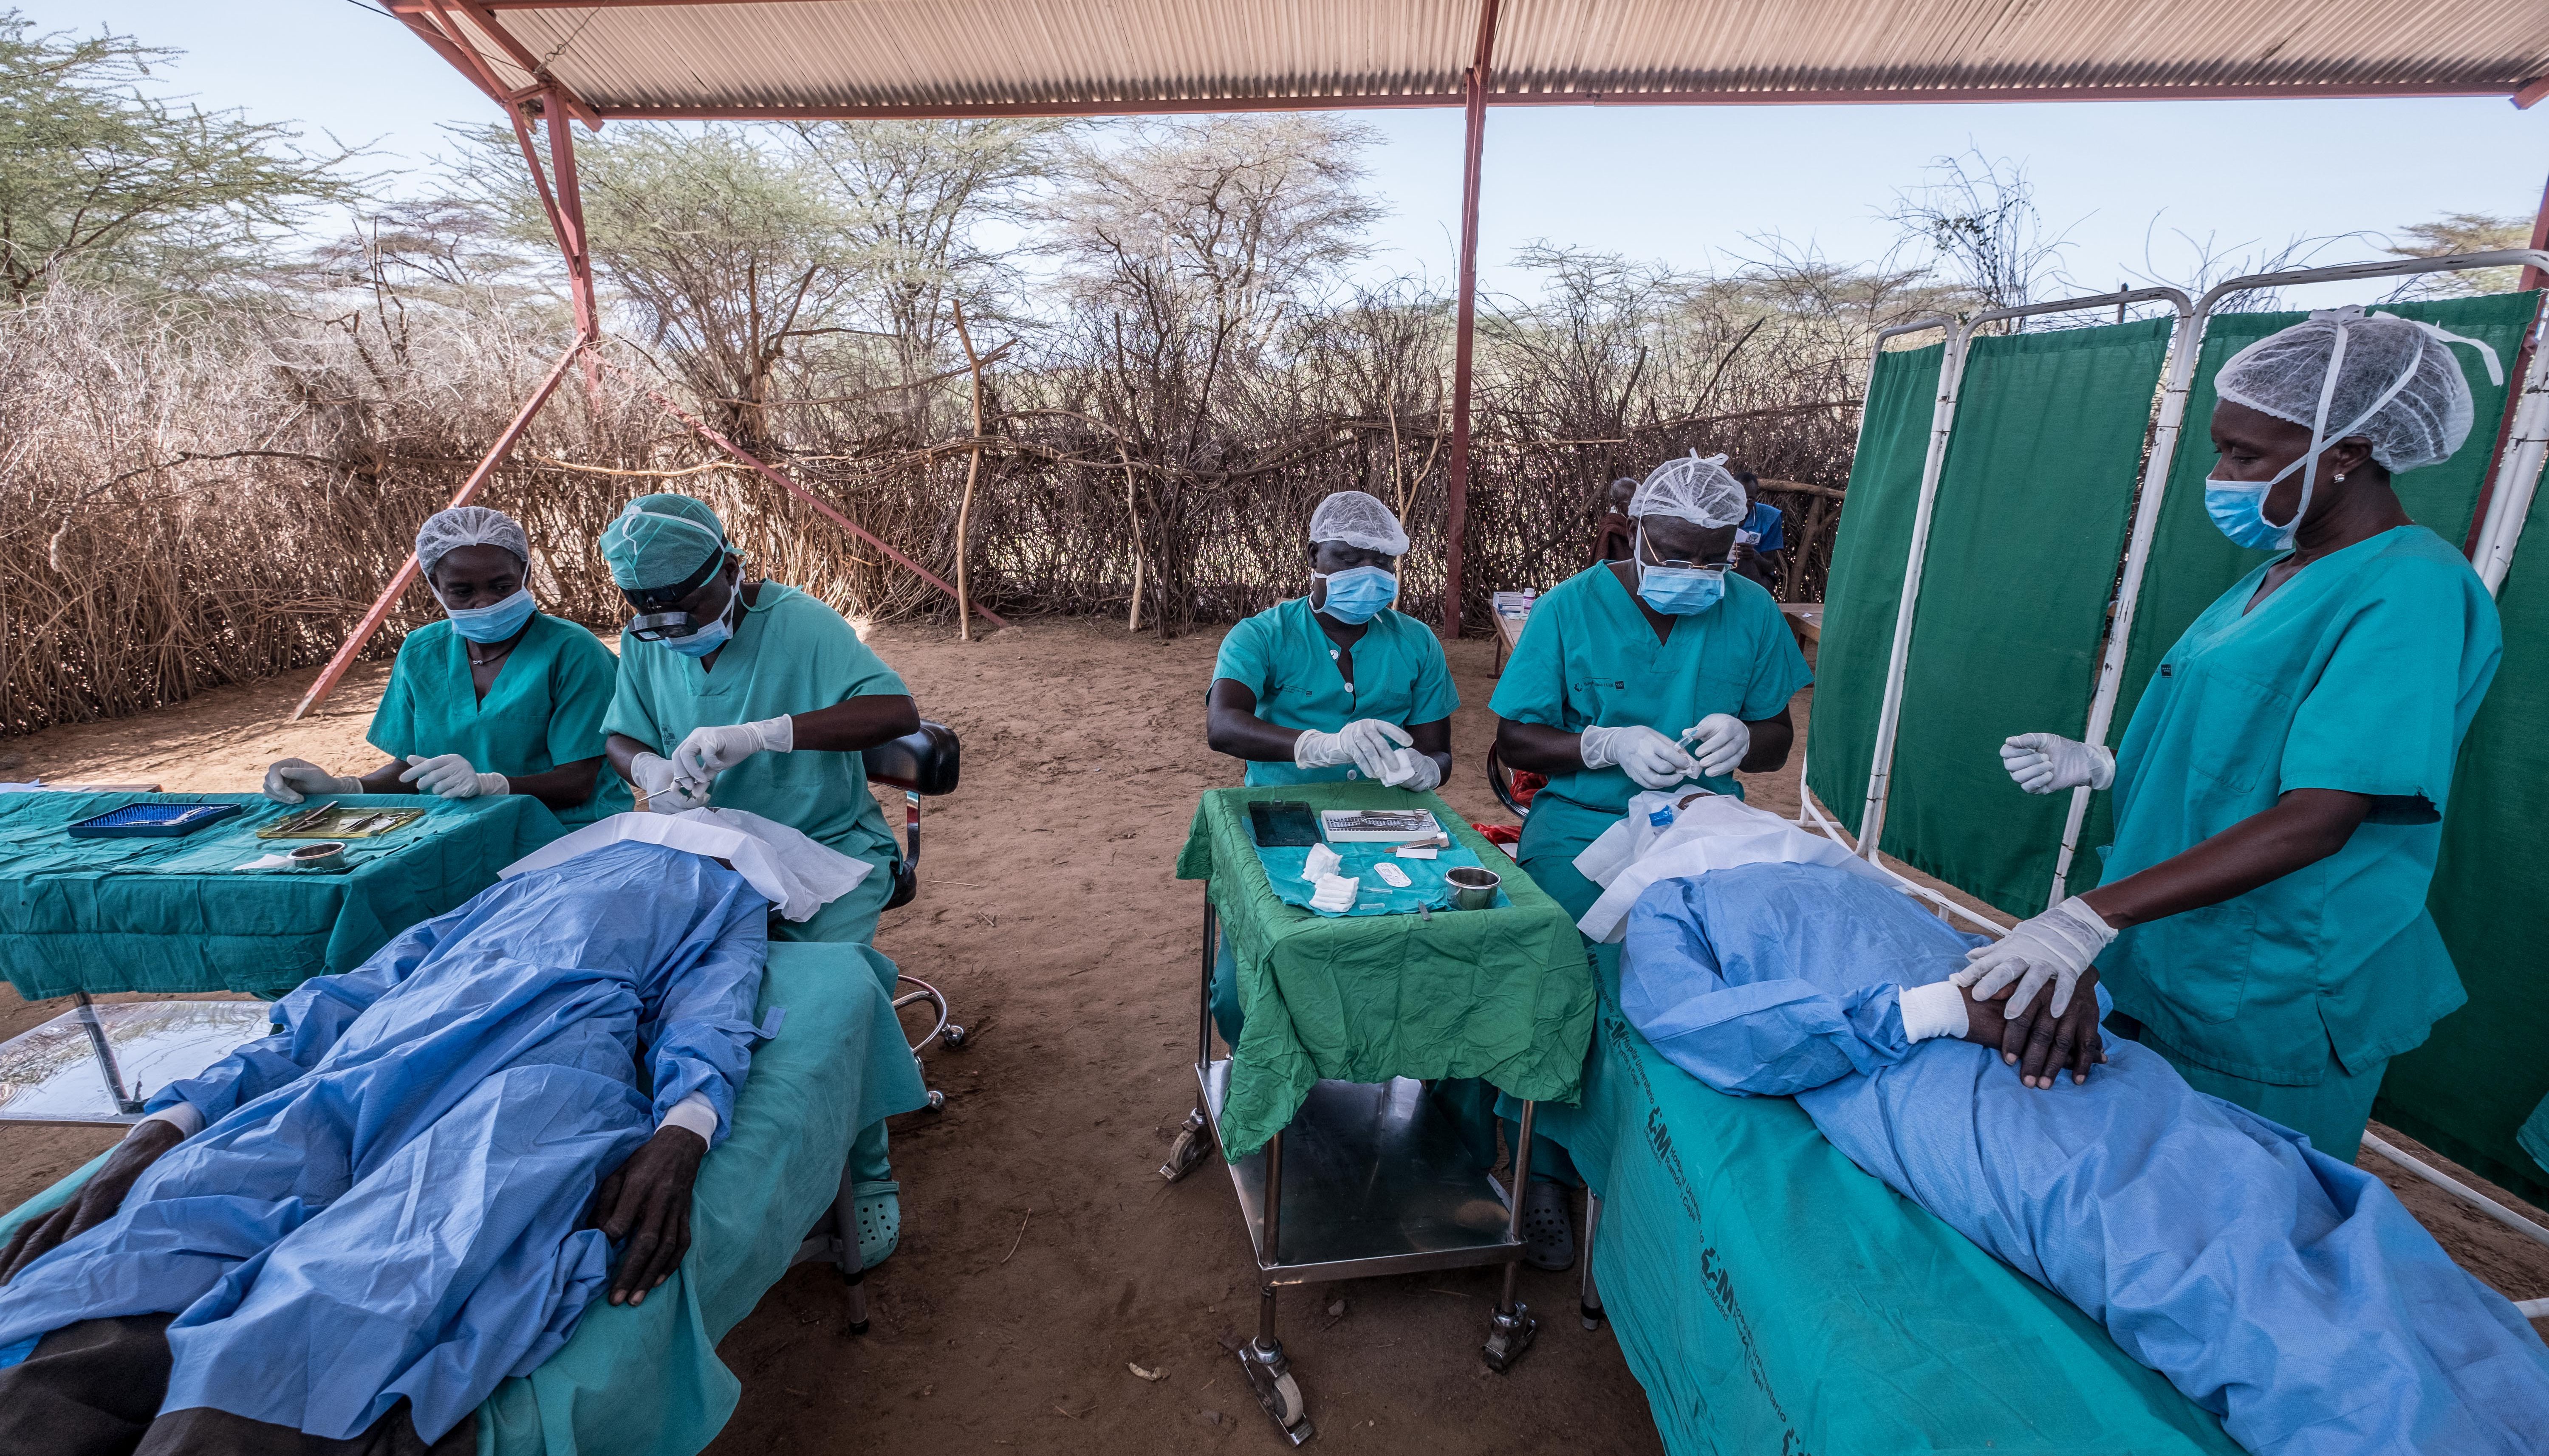 Read Surgeries in the desert by Sightsavers